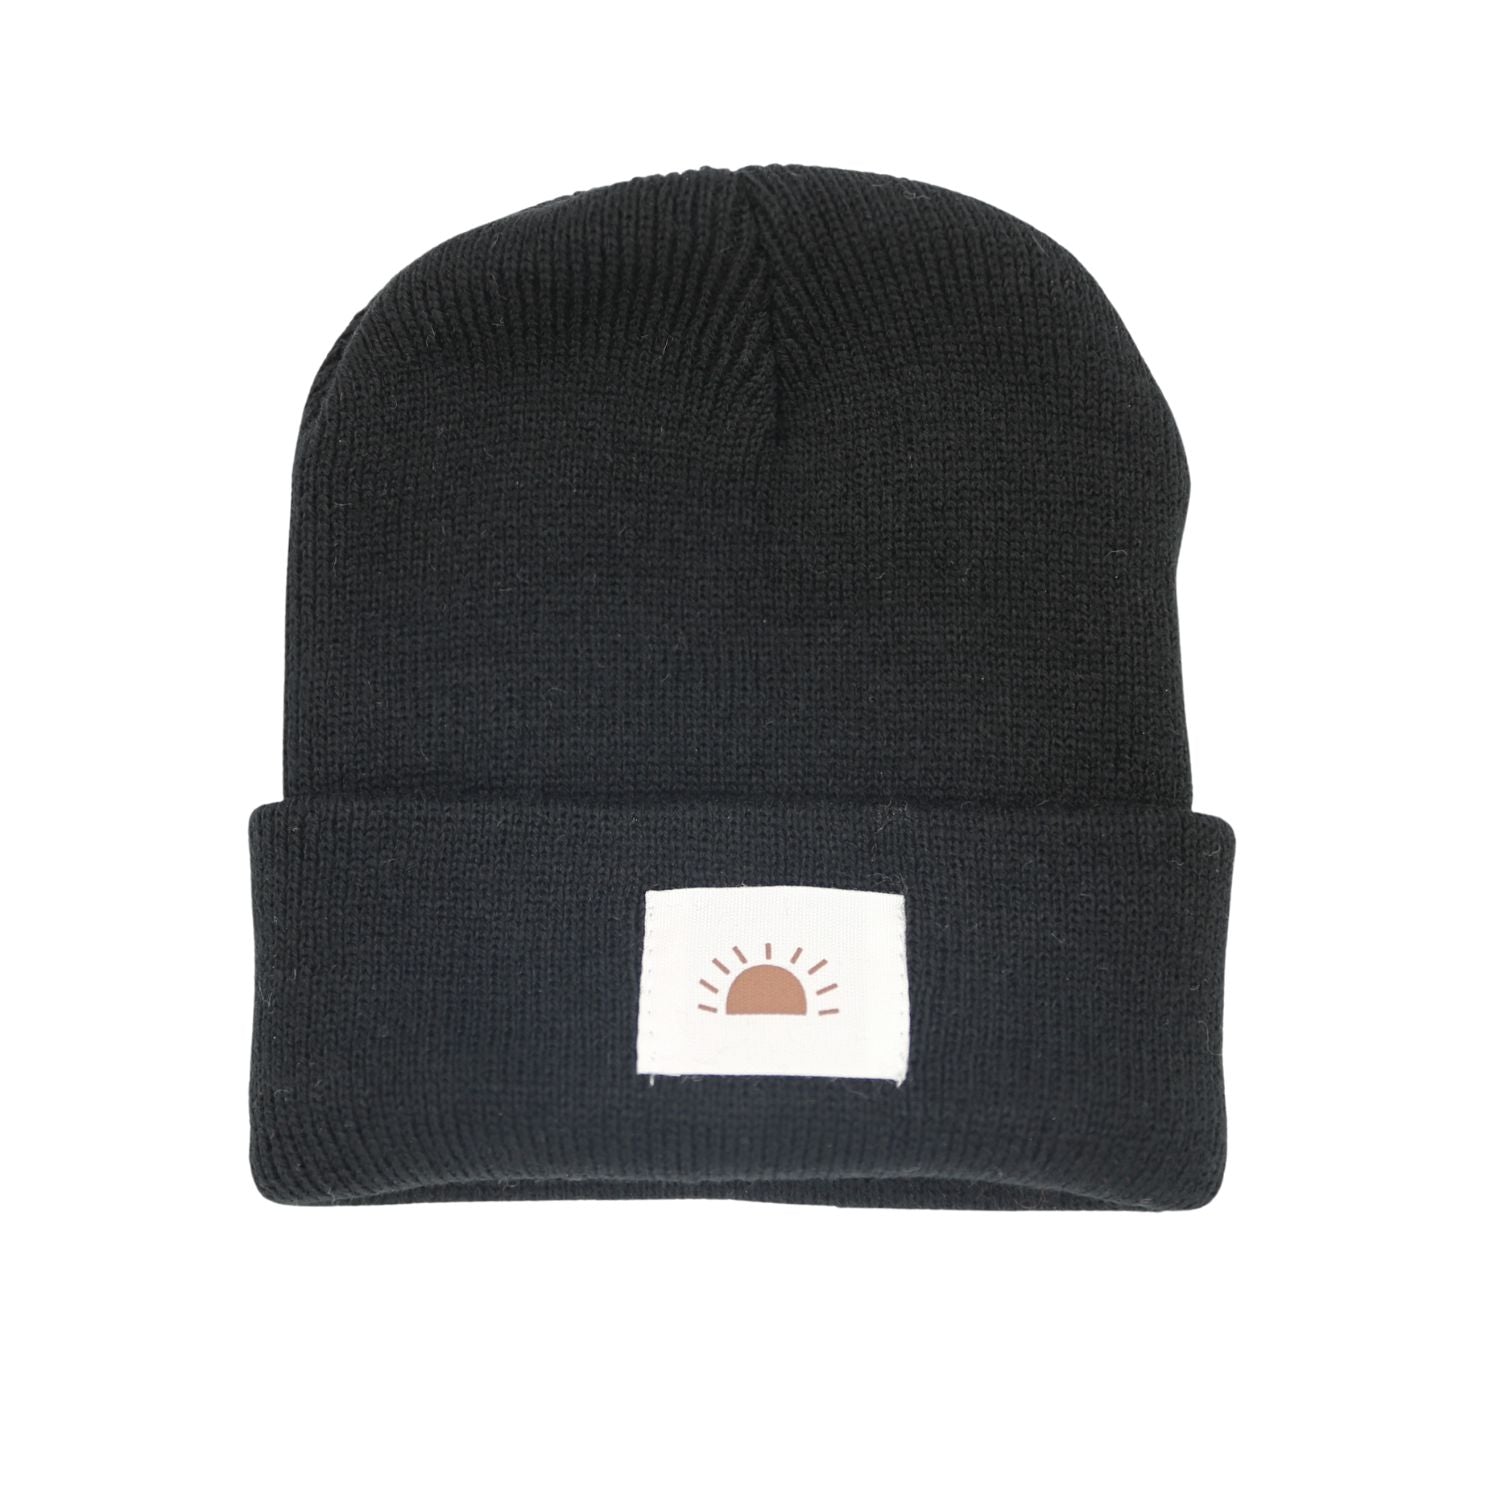 The Baby Cubby Sun Patch Knitted Beanie - Black